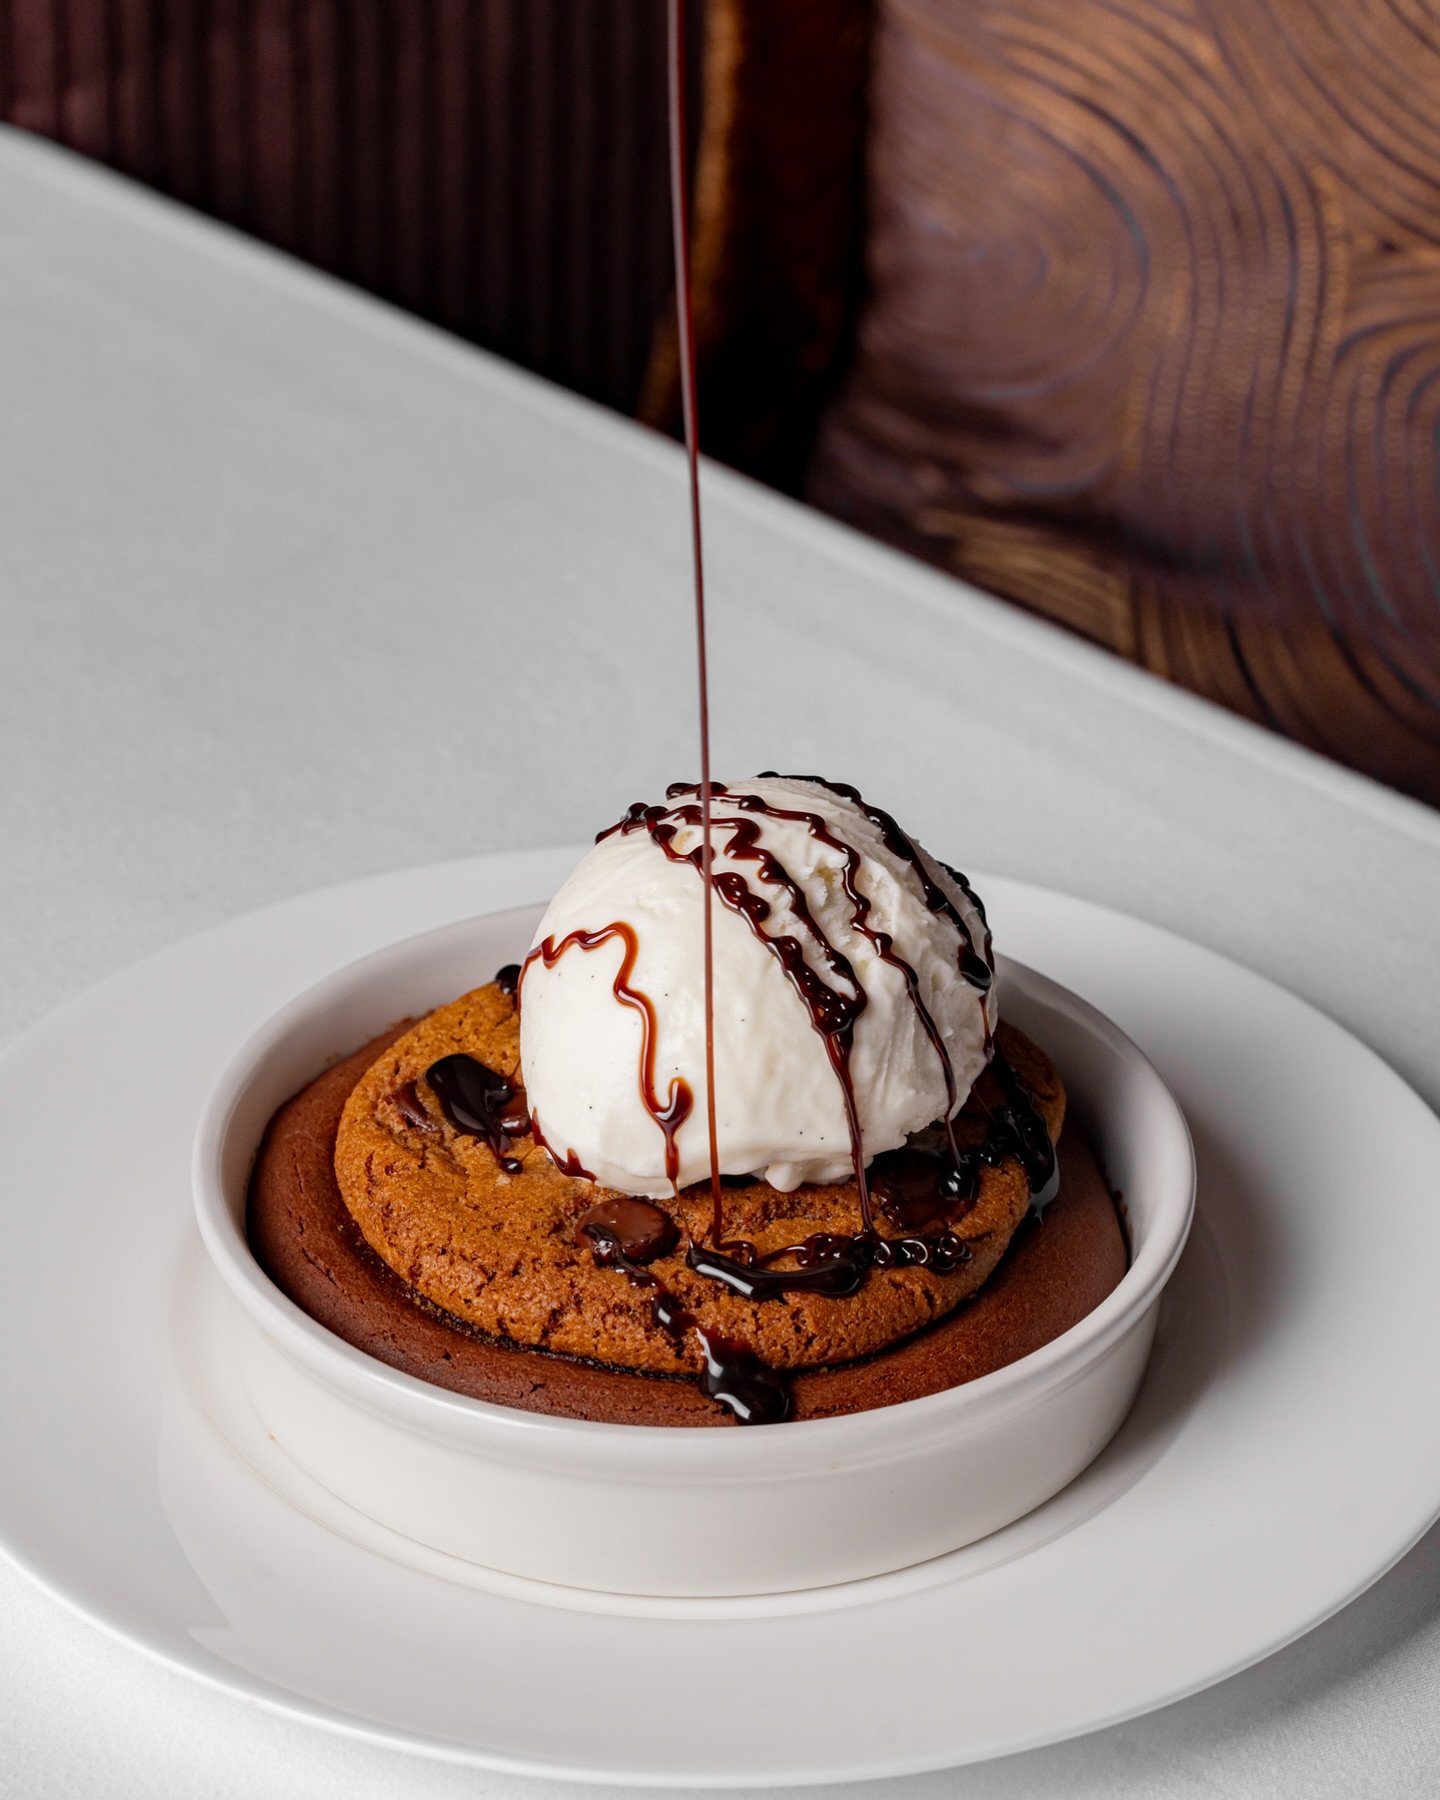 Join us this weekend and savour a bite of our warm Brownie al Cioccolato with sweet vanilla ice cream via the link in our bio.